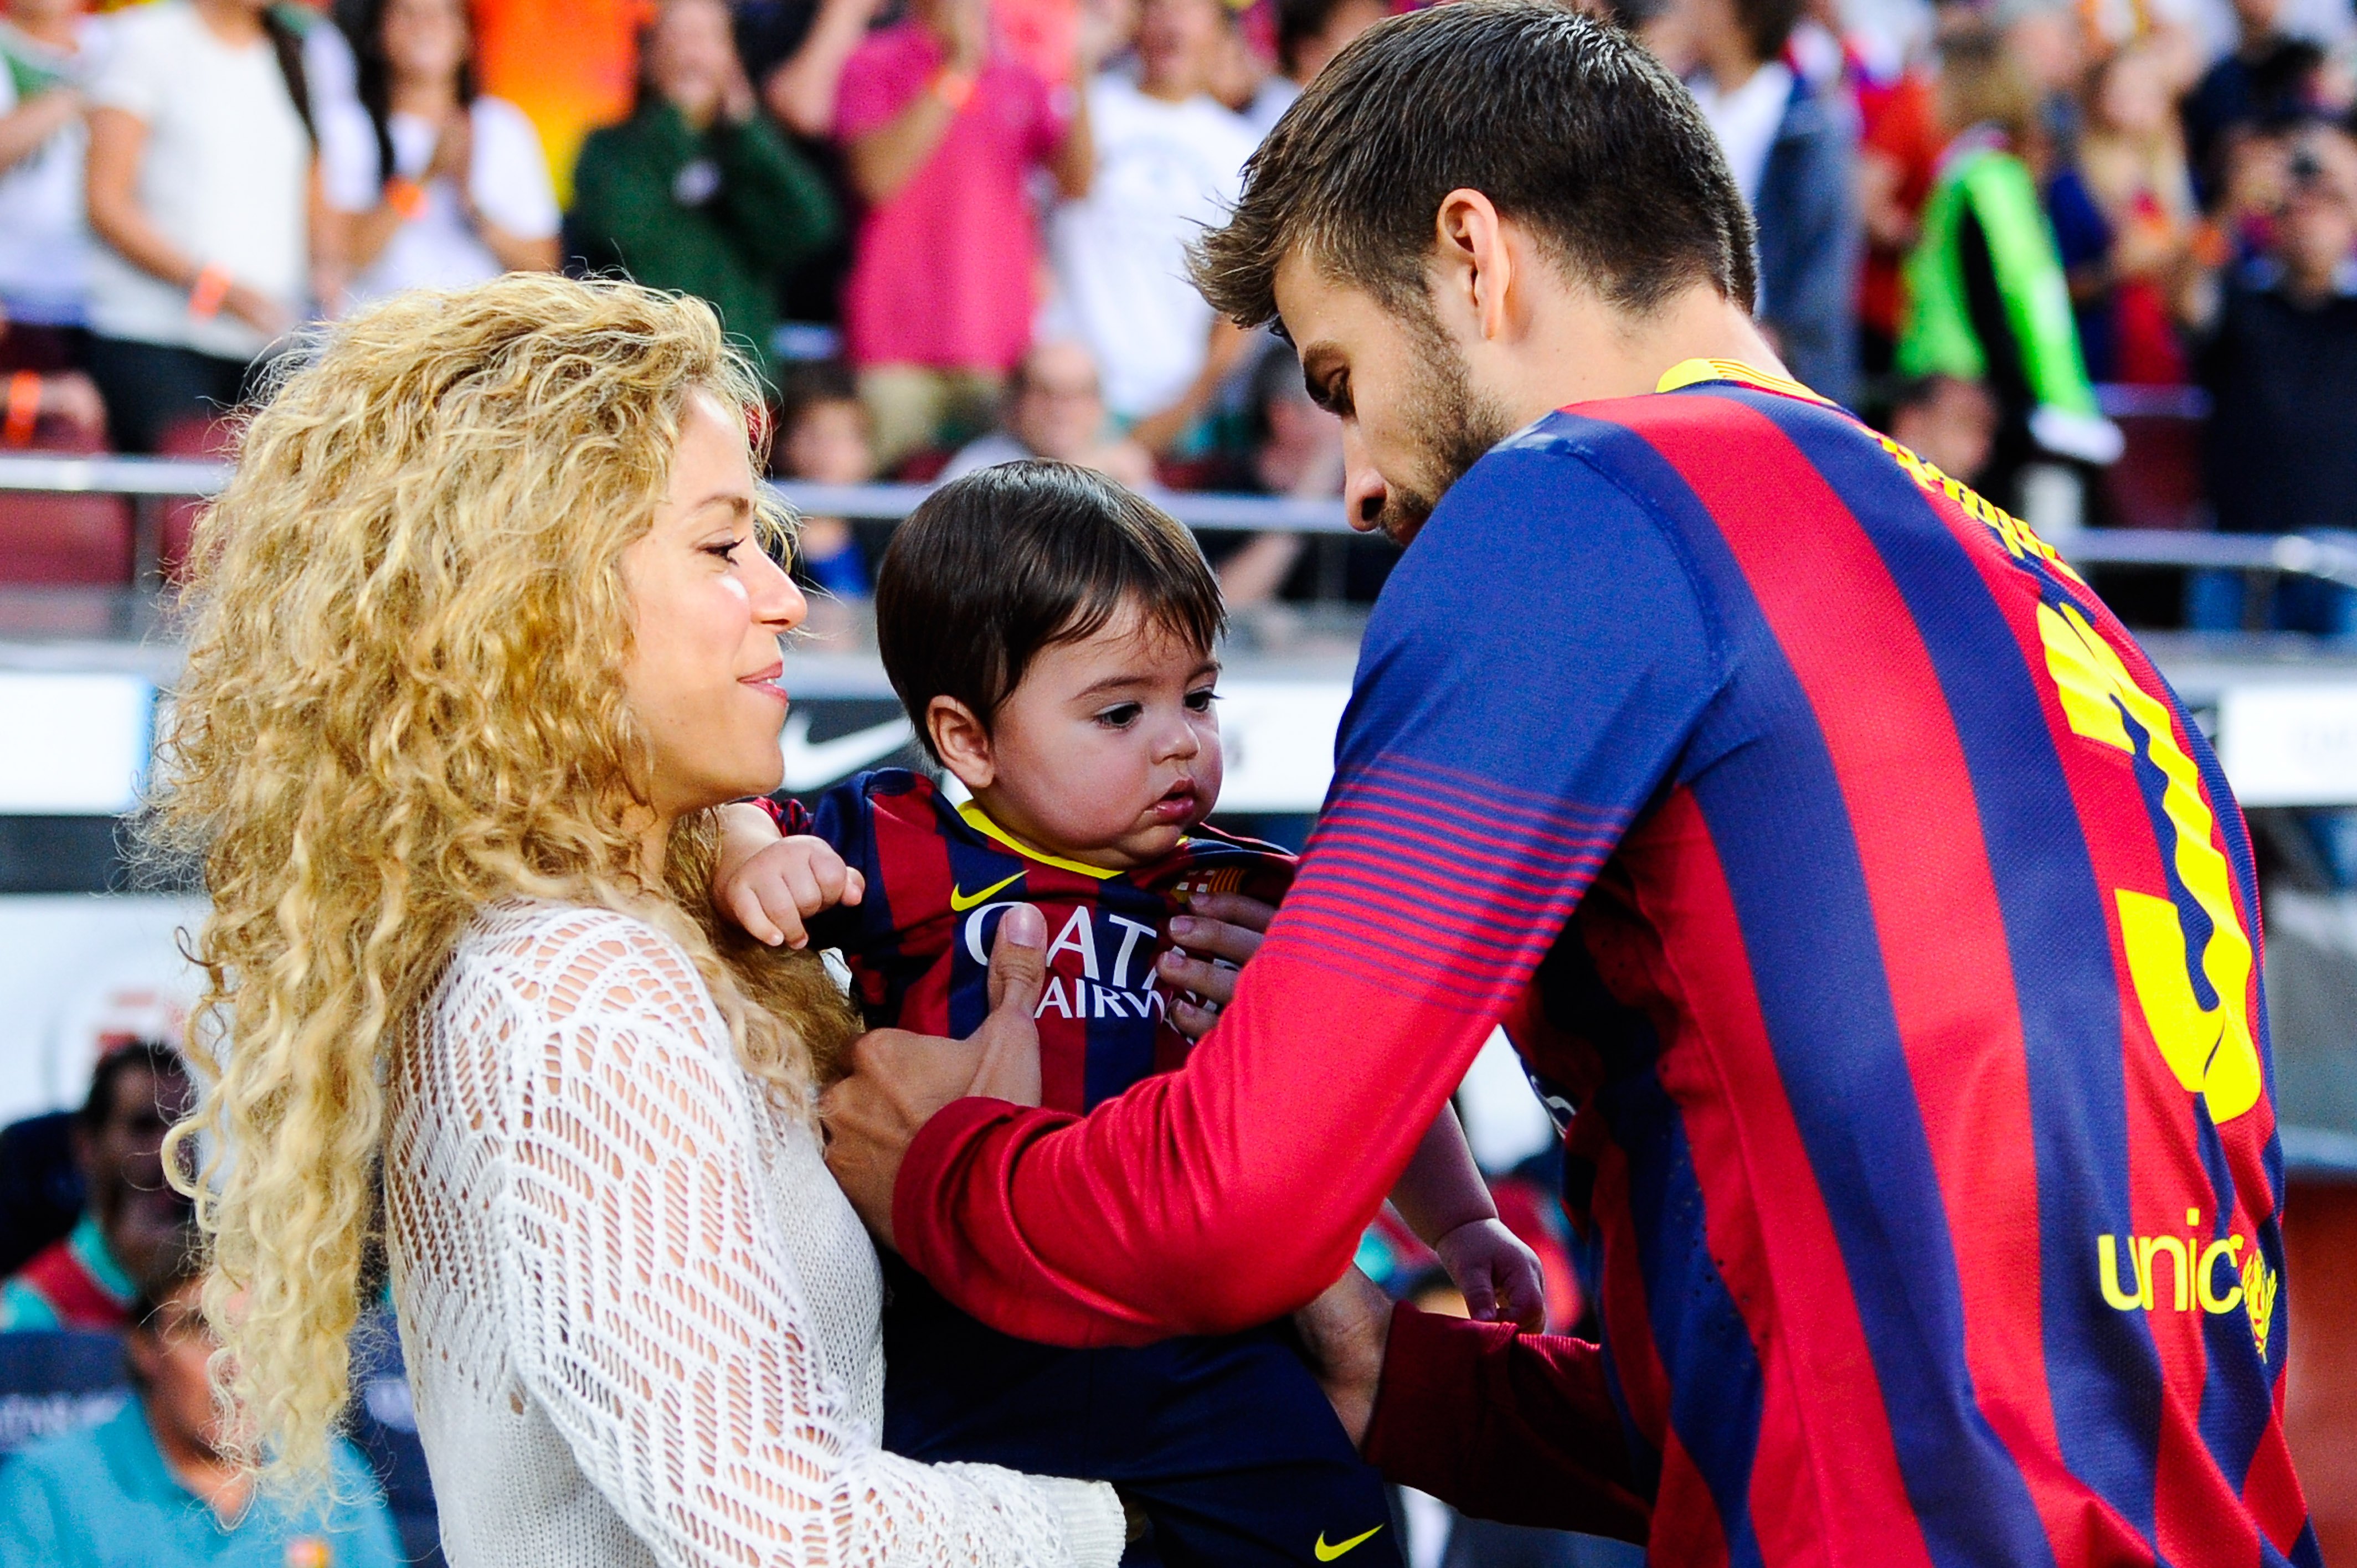 BARCELONA, SPAIN - SEPTEMBER 14: Shakira and Gerard Pique of FC Barcelona are seen with their son Milan prior to the La Liga match between FC Barcelona and Sevilla FC at Camp Nou on September 14, 2013 in Barcelona, Spain. (Photo by David Ramos/Getty Images)